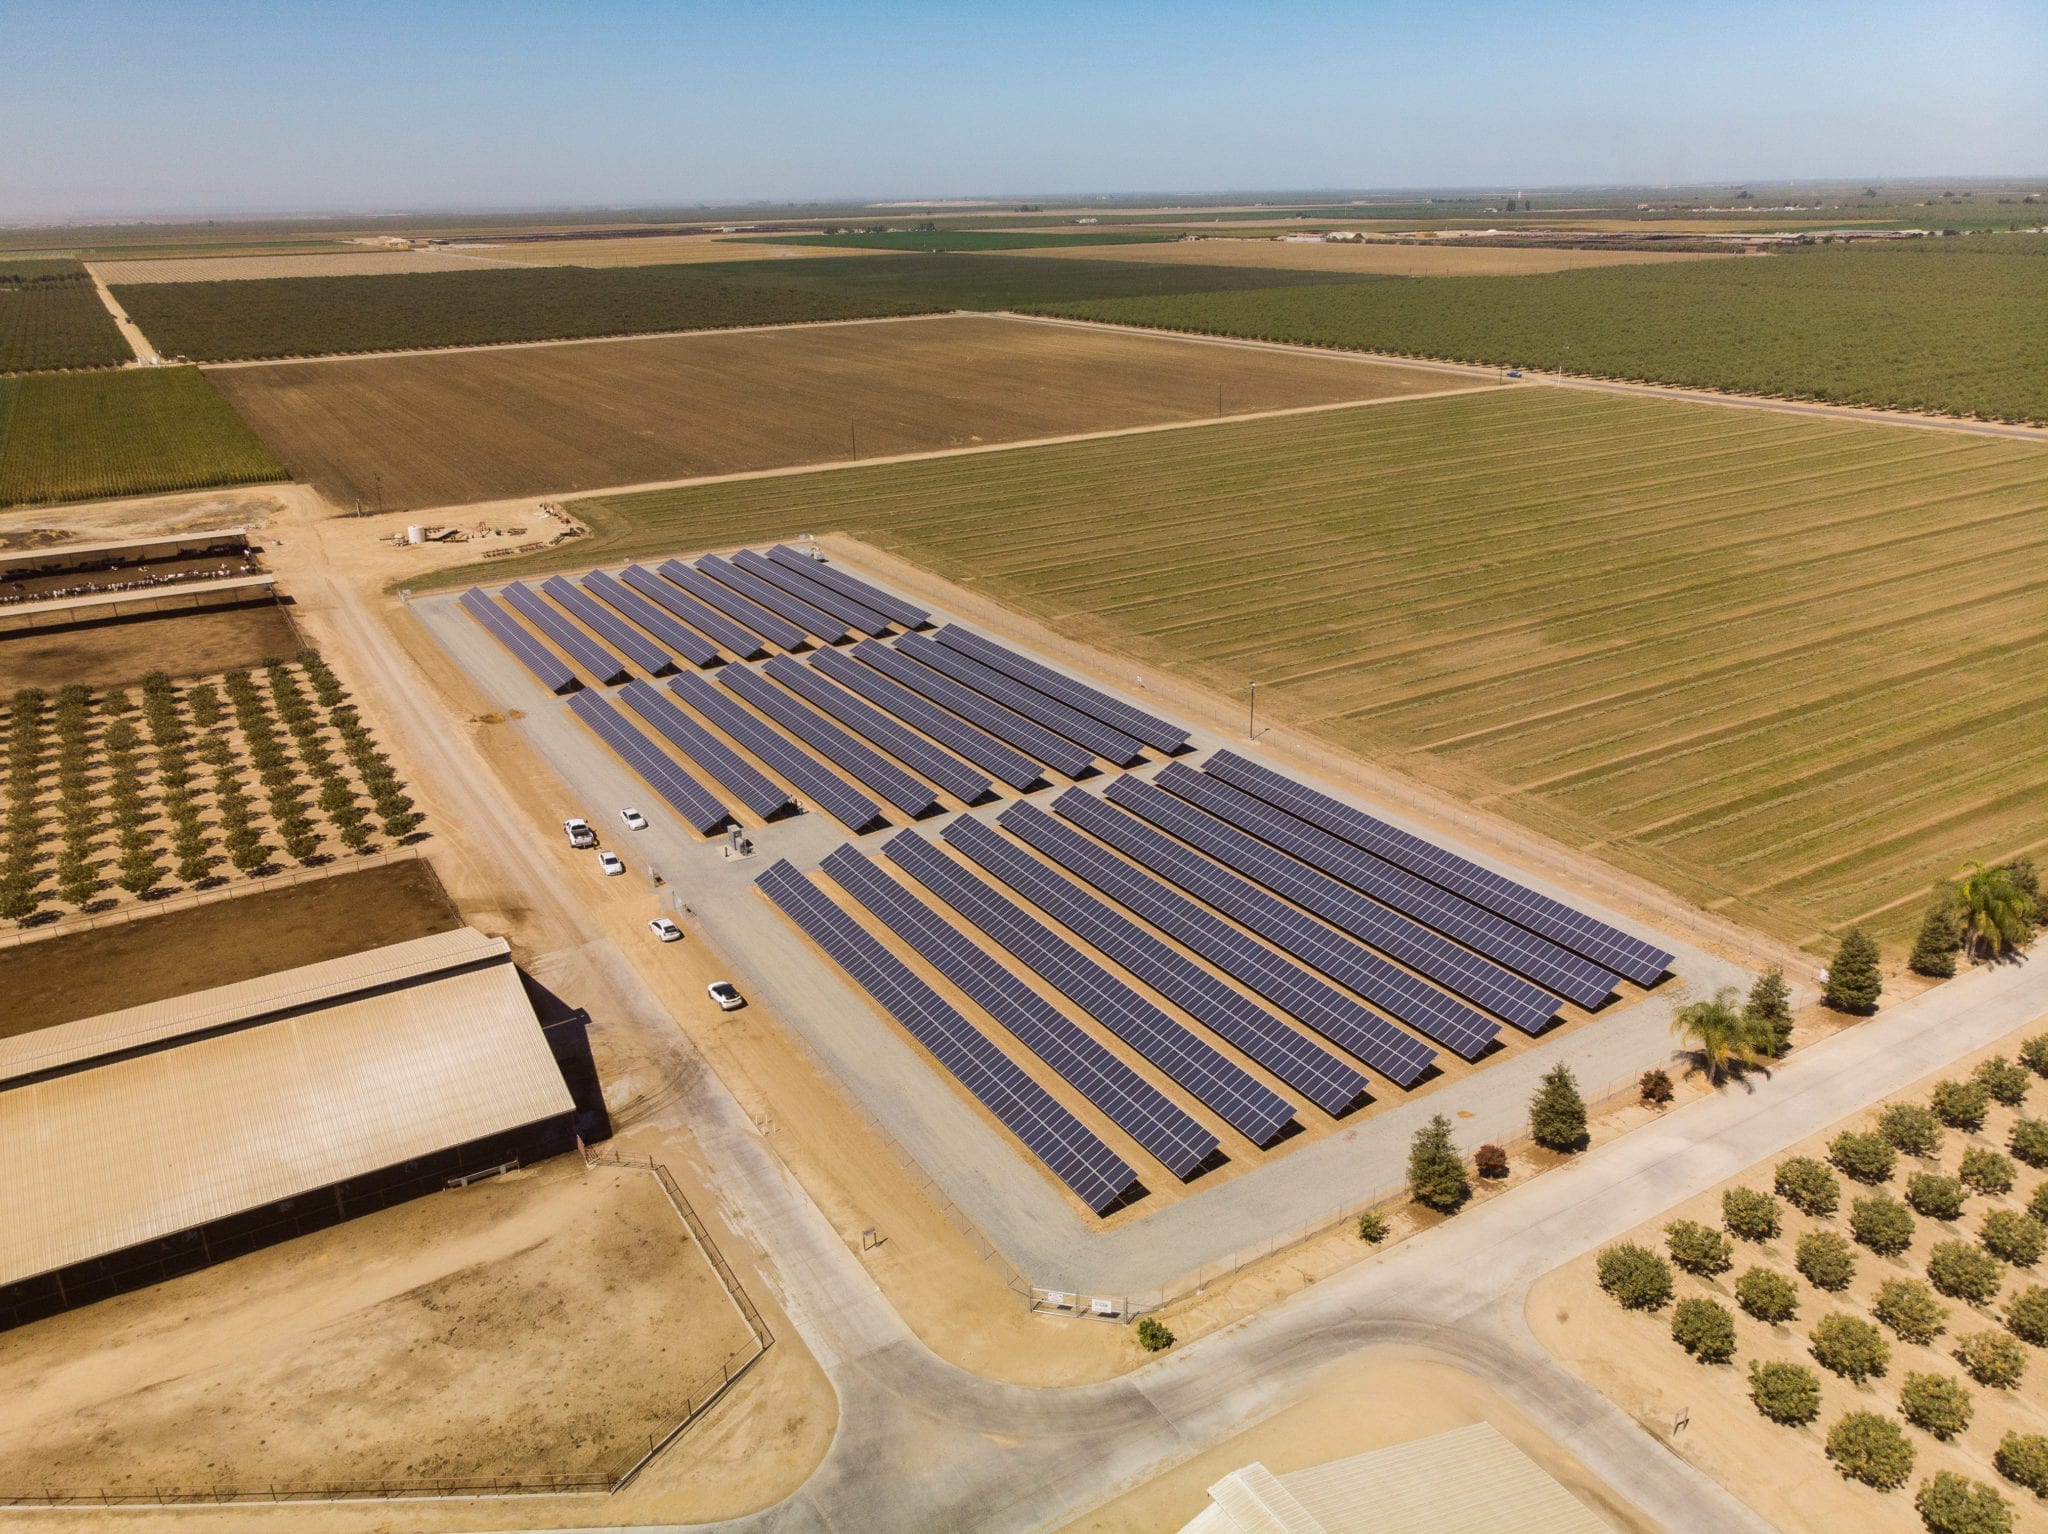 Aerial view of solar installation surrounded by crops and plowed farmland at Skyview Dairy in Shafter, California.